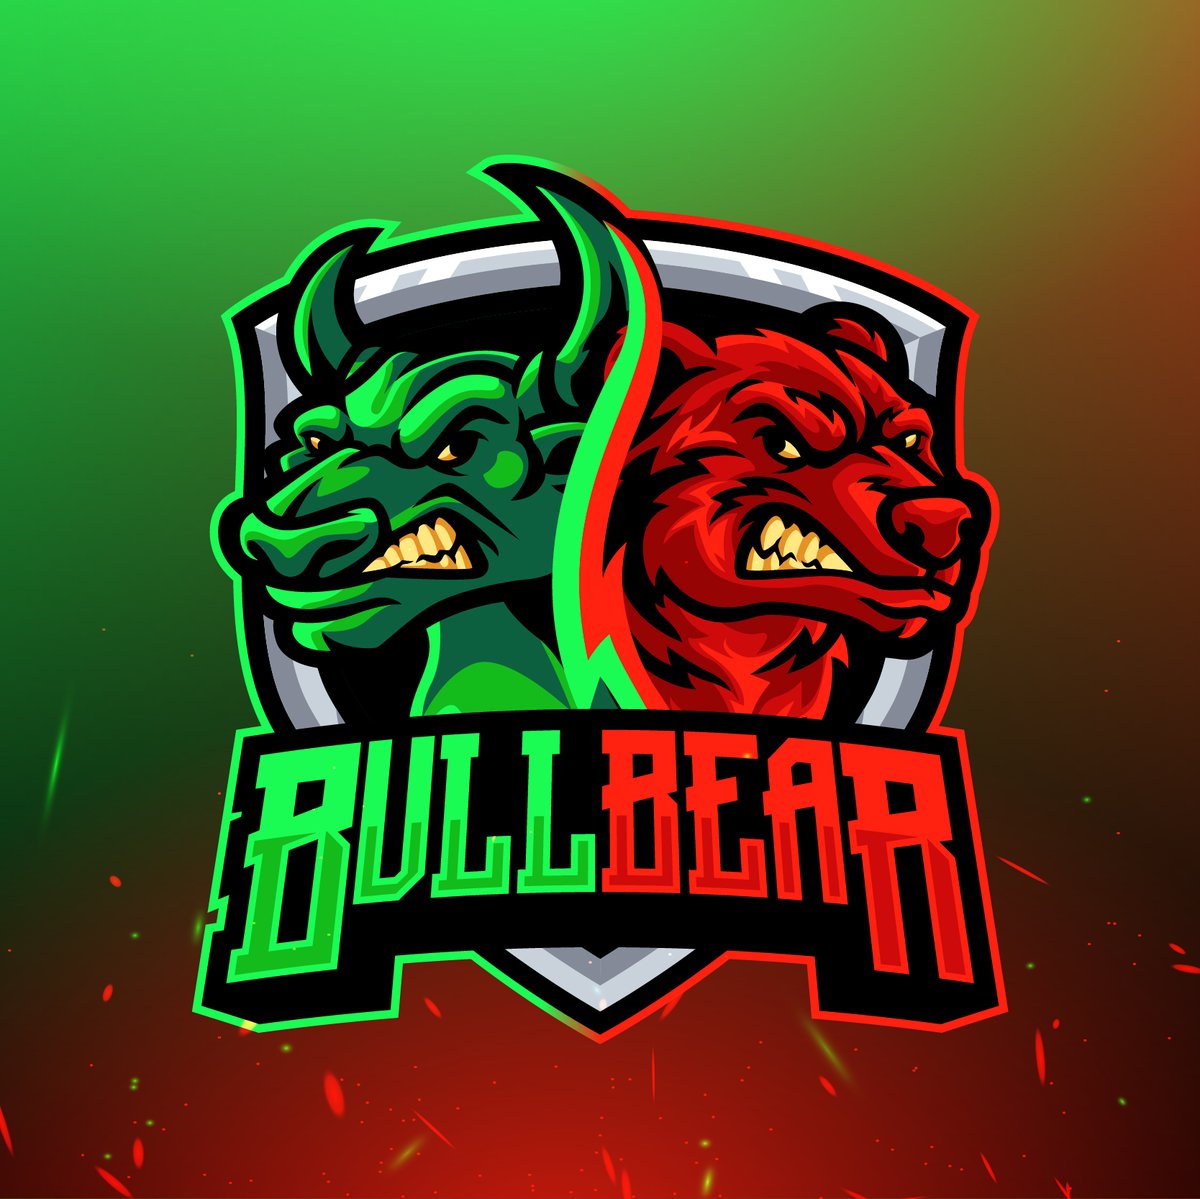 #Play at least 10 rounds on @BullBearFun and we will pay back 10 #MATIC to the first 50 #players that post the address used to login, in the comments. To qualify also follow @BullBearFun, RT and LIKE this post! To Play: bullbear.fun/?ref=MqPEFEXo9… #BTC #OnPolygon #gaming #Contests